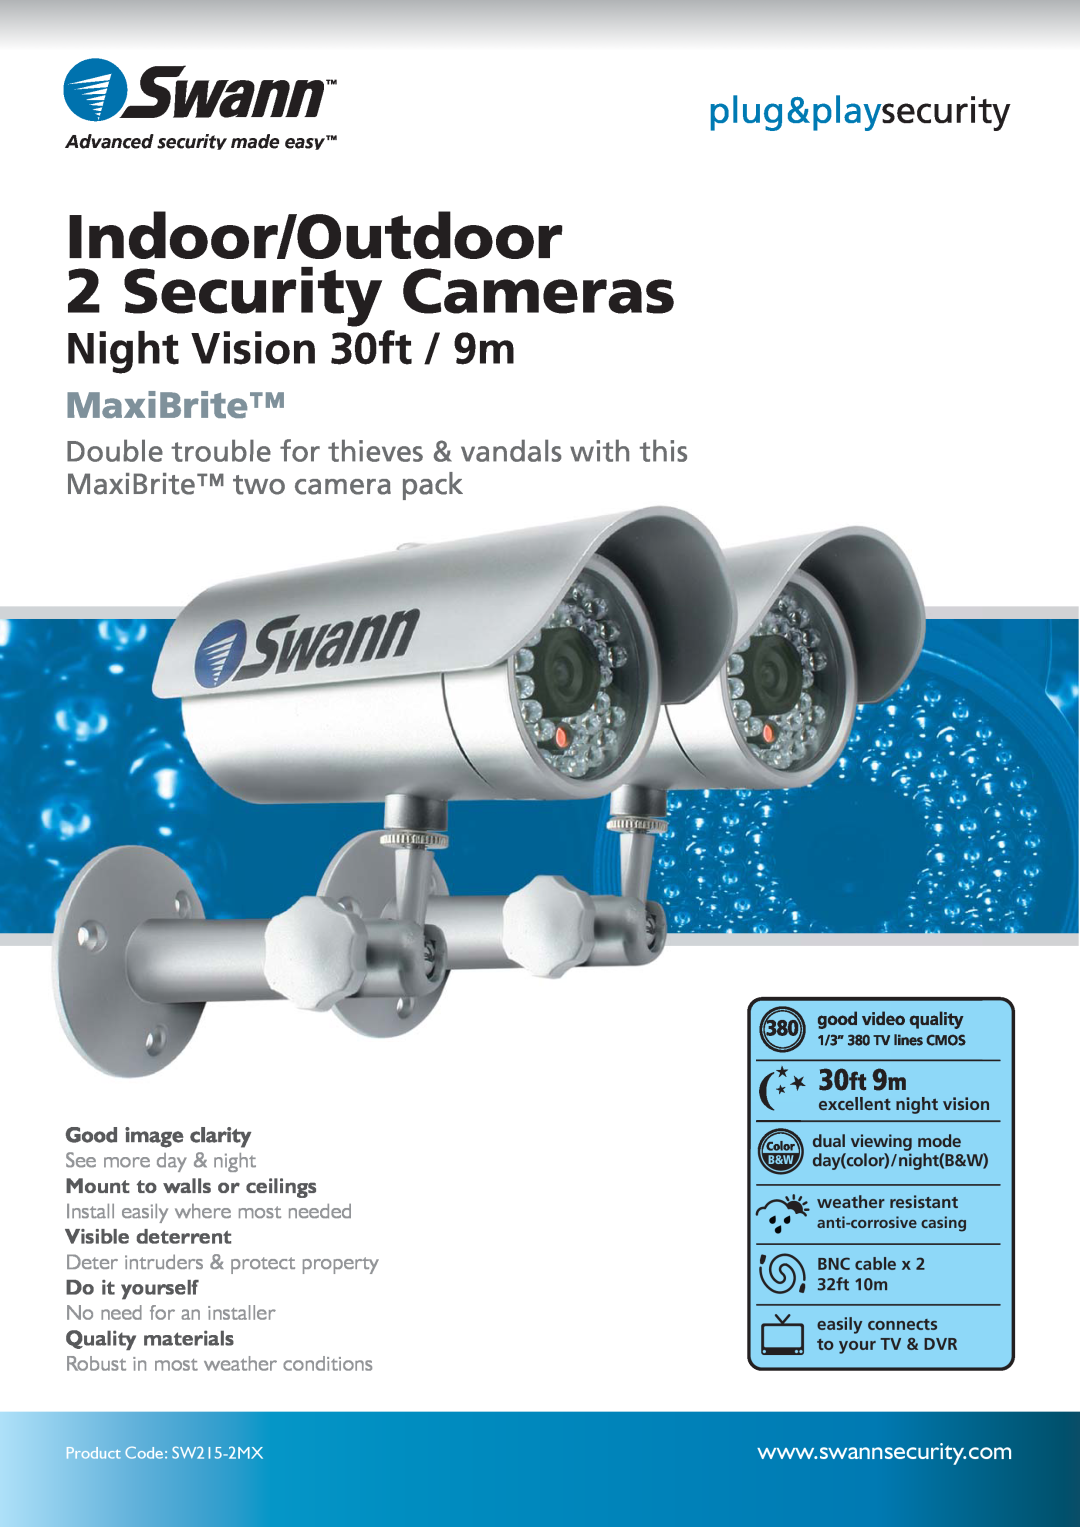 Swann SW215-2MX manual plug&playsecurity, Advanced security made easy, anti-corrosive casing, Night Vision 30ft / 9m 